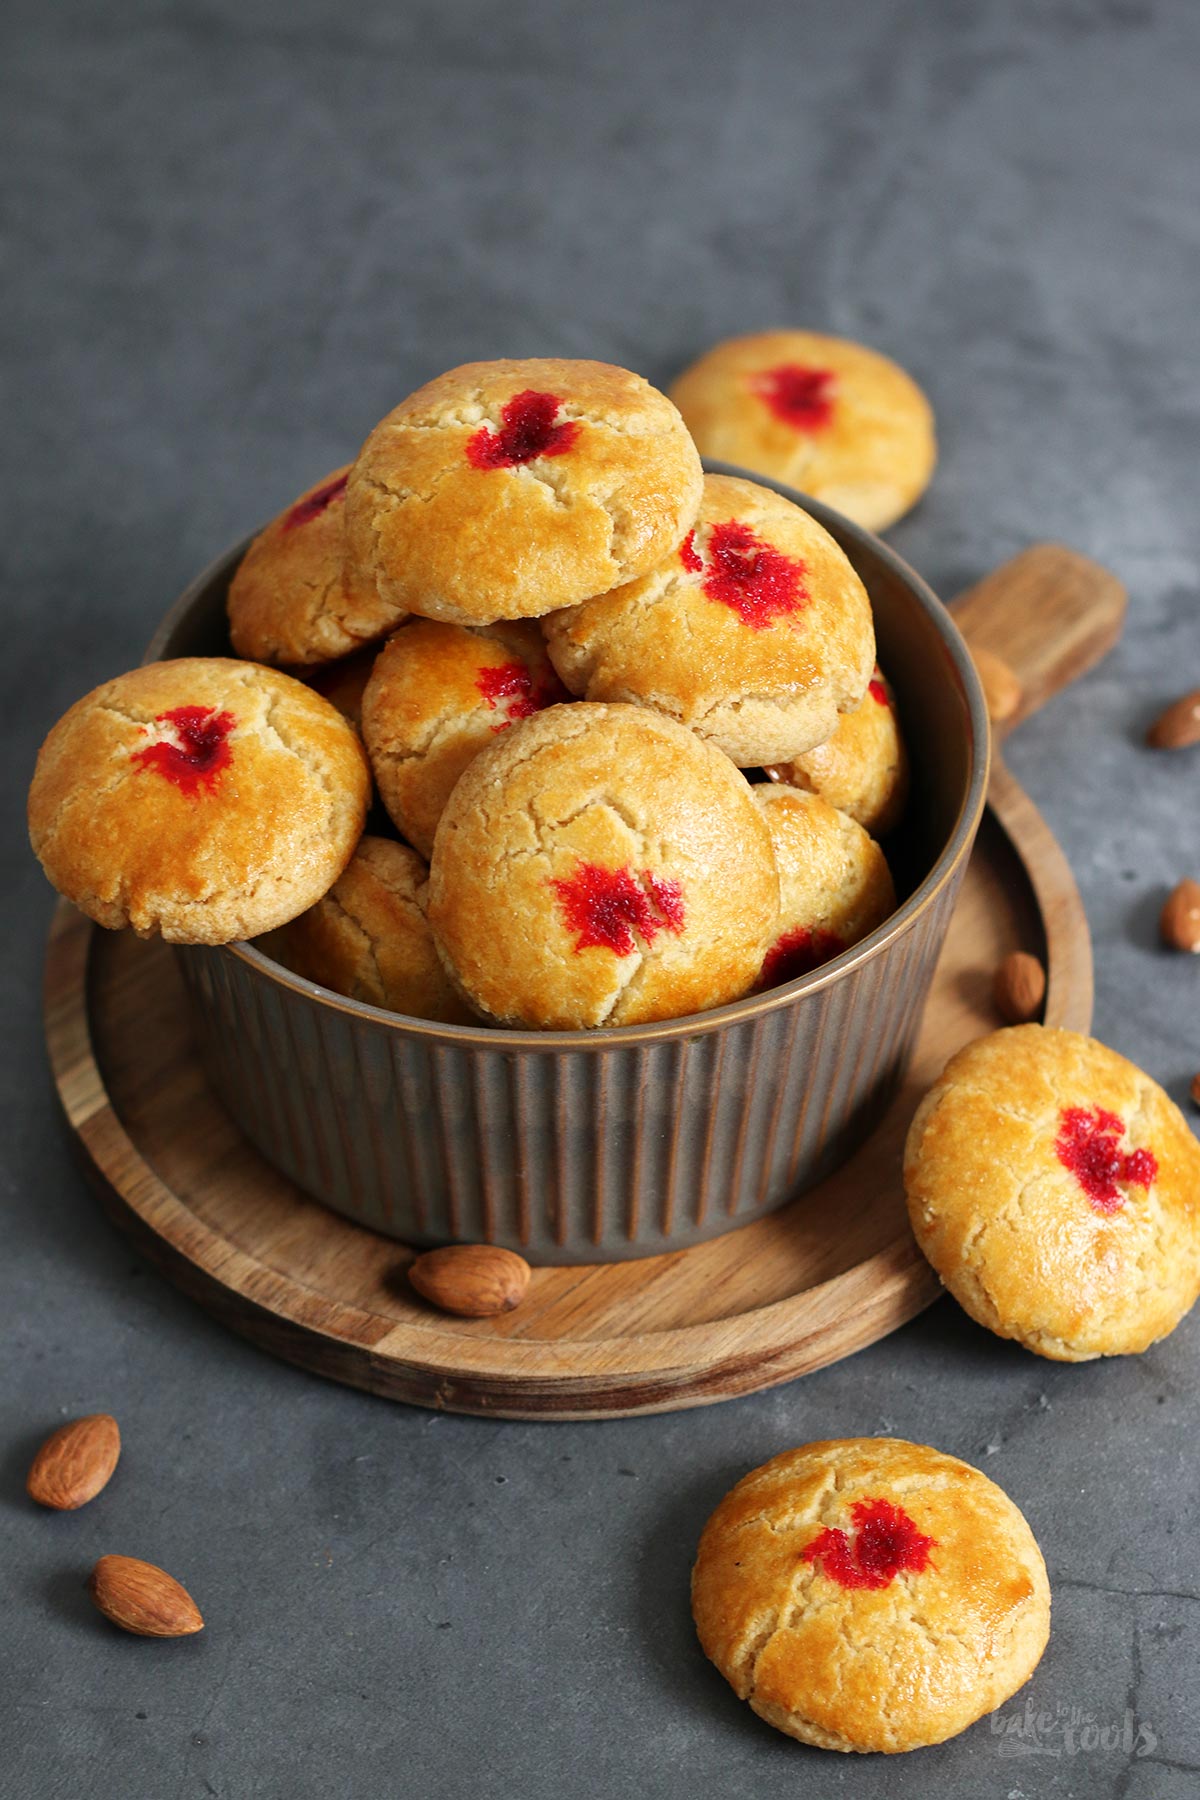 Chinese Almond Cookies | Bake to the roots